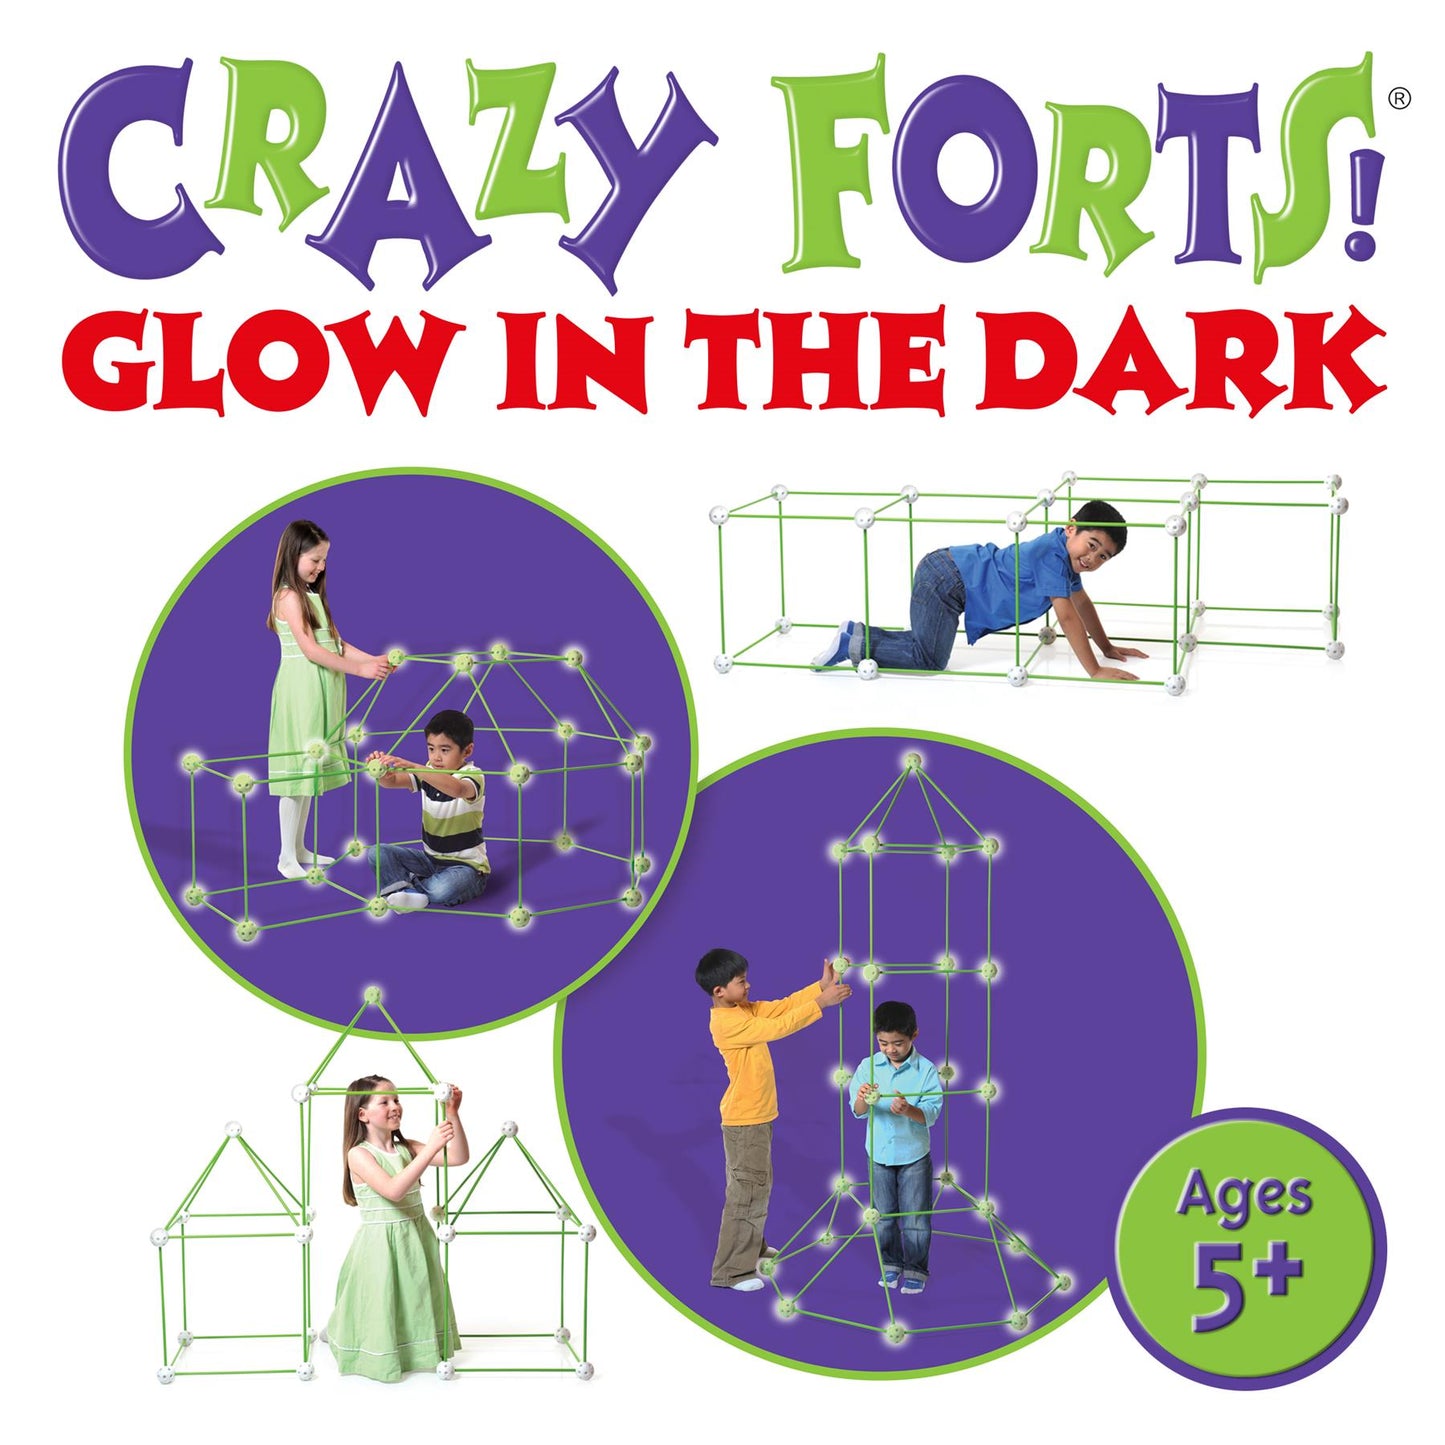 Crazy Forts - Glow in the Dark!